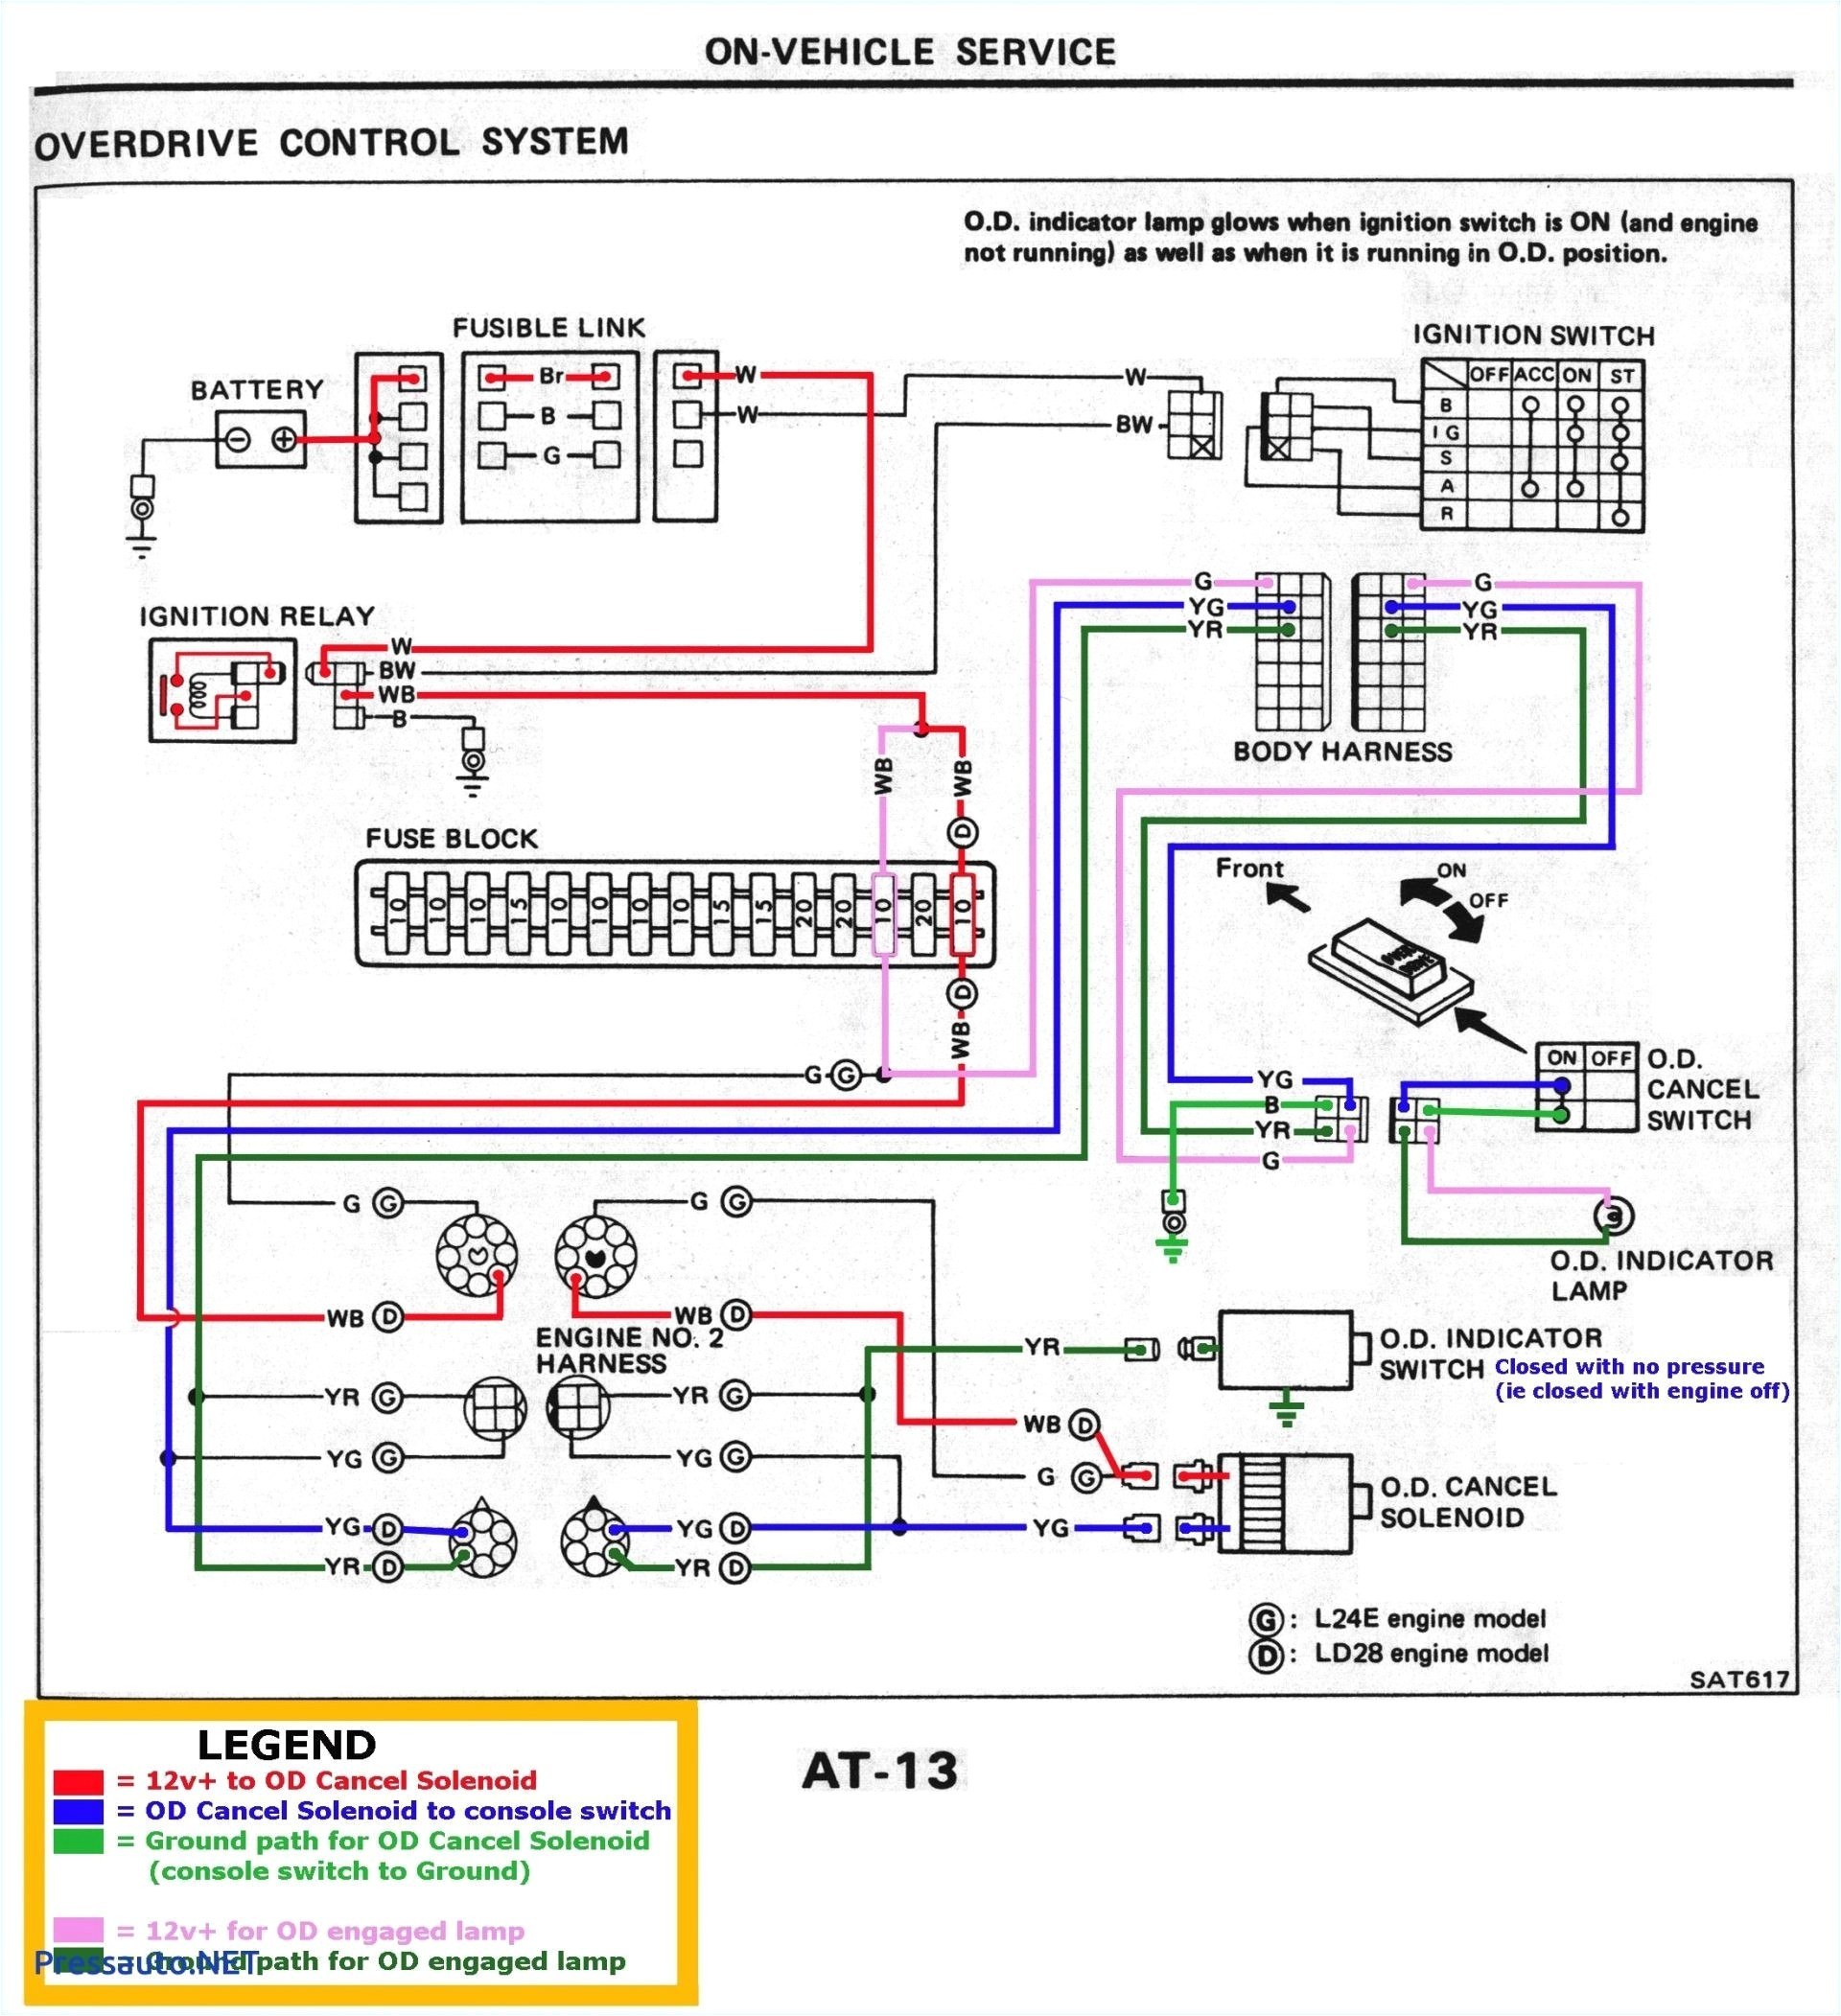 pictures gallery of single phase motor wiring diagram unique single phase electric motor wiring diagram unique wiring diagram od